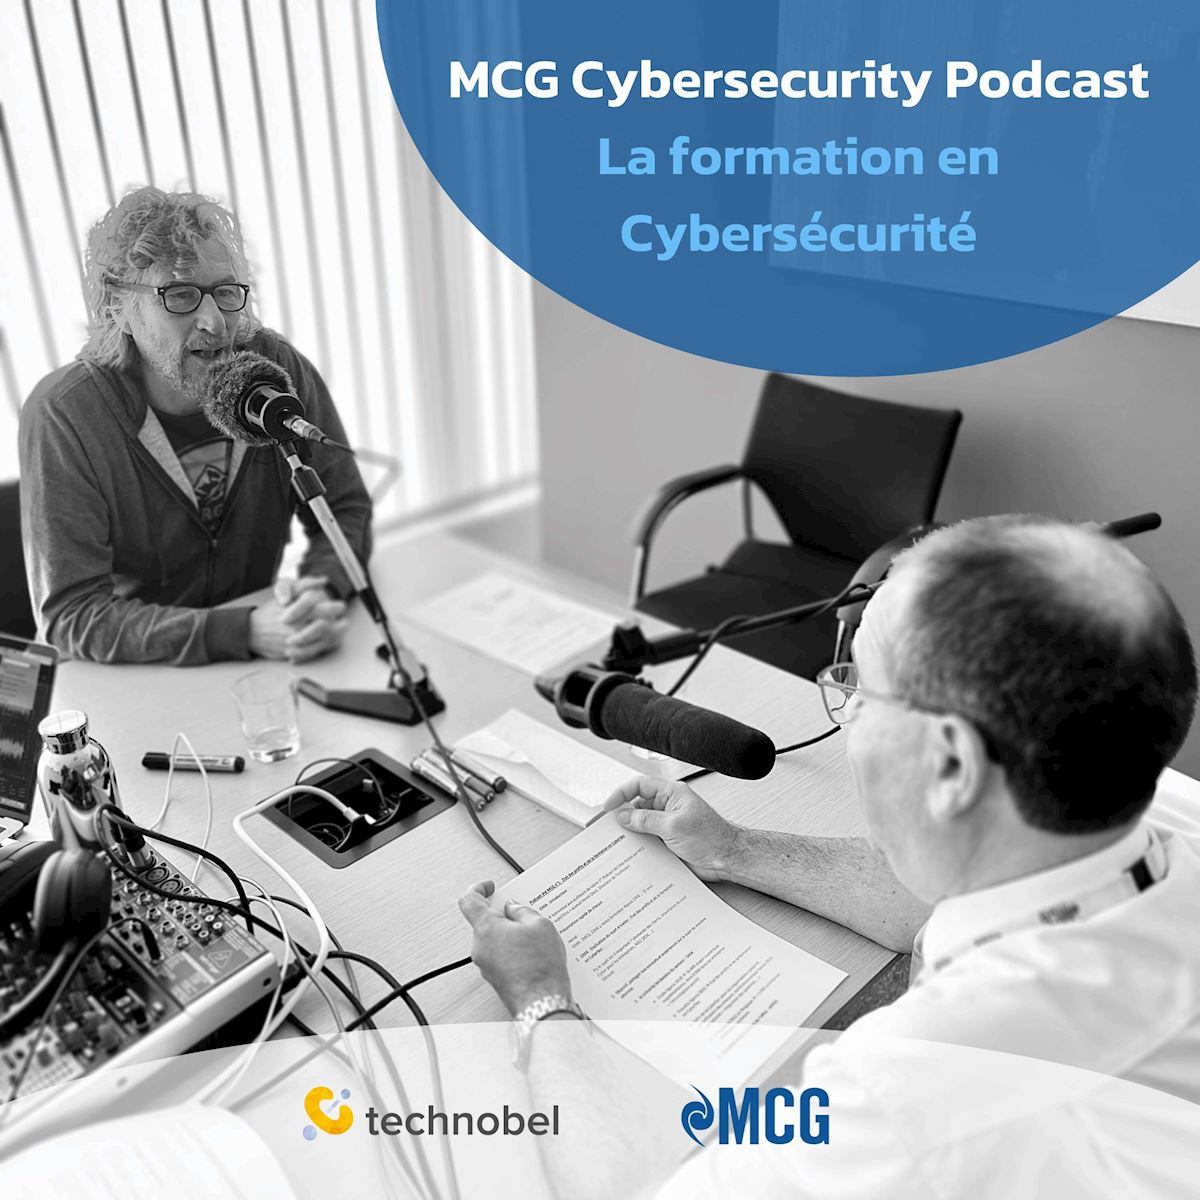 MCG Cybersecurity Podcast - Episode 1